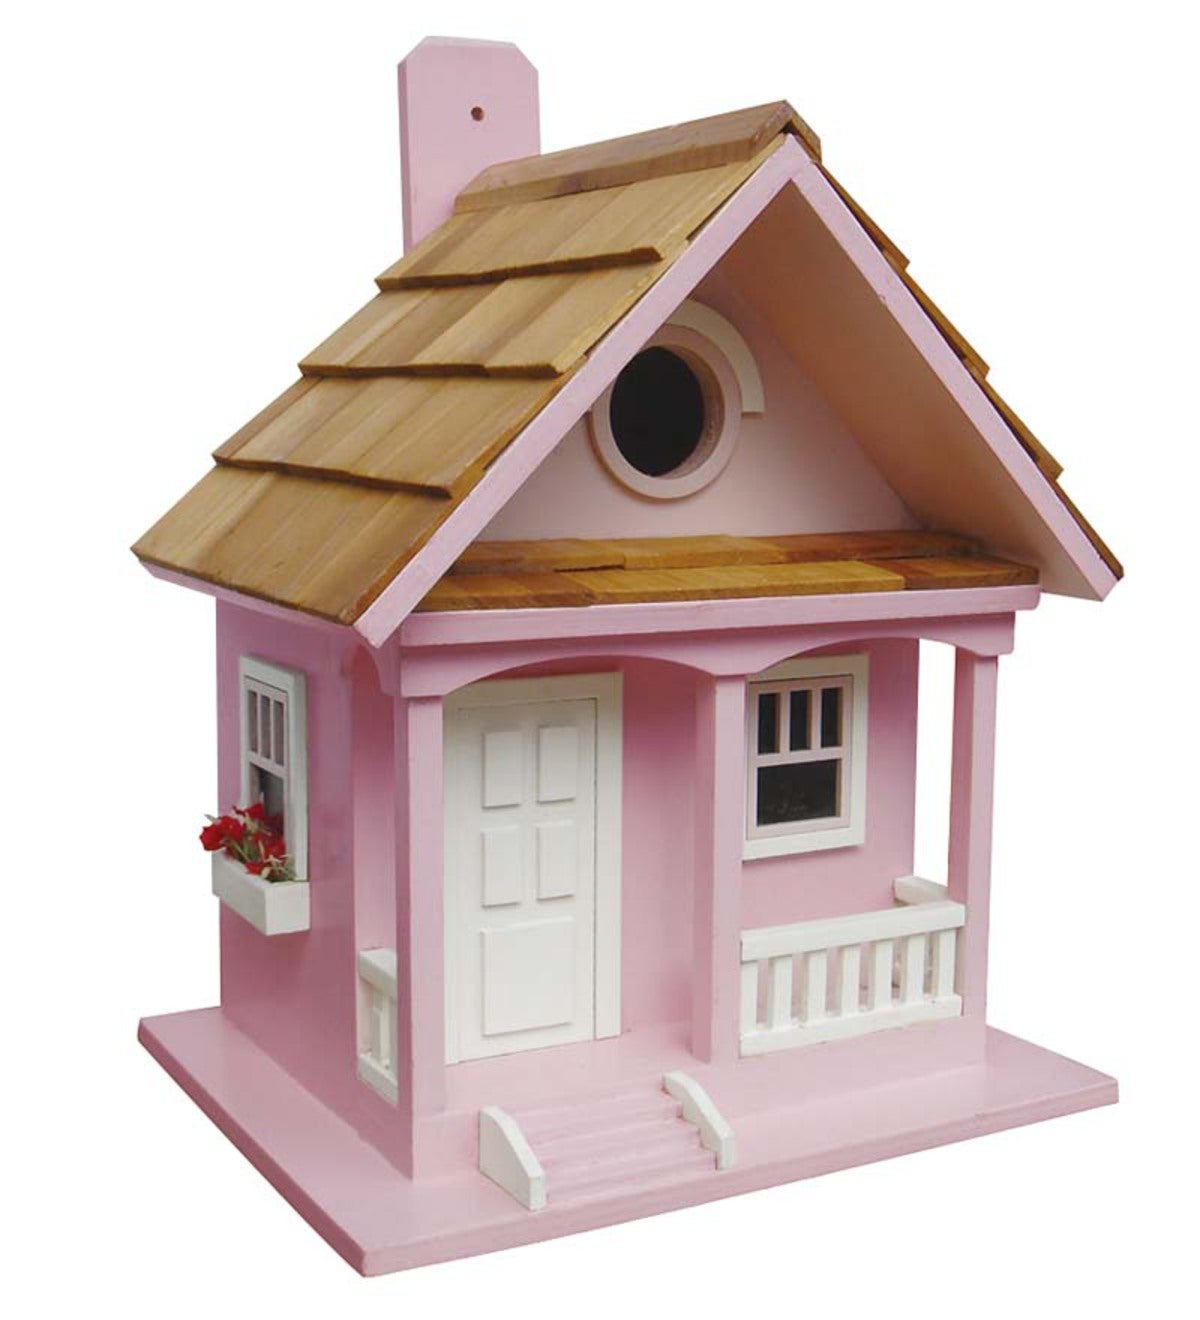 Wood Cottage Birdhouse with Flowerboxes - Cotton Candy Pink